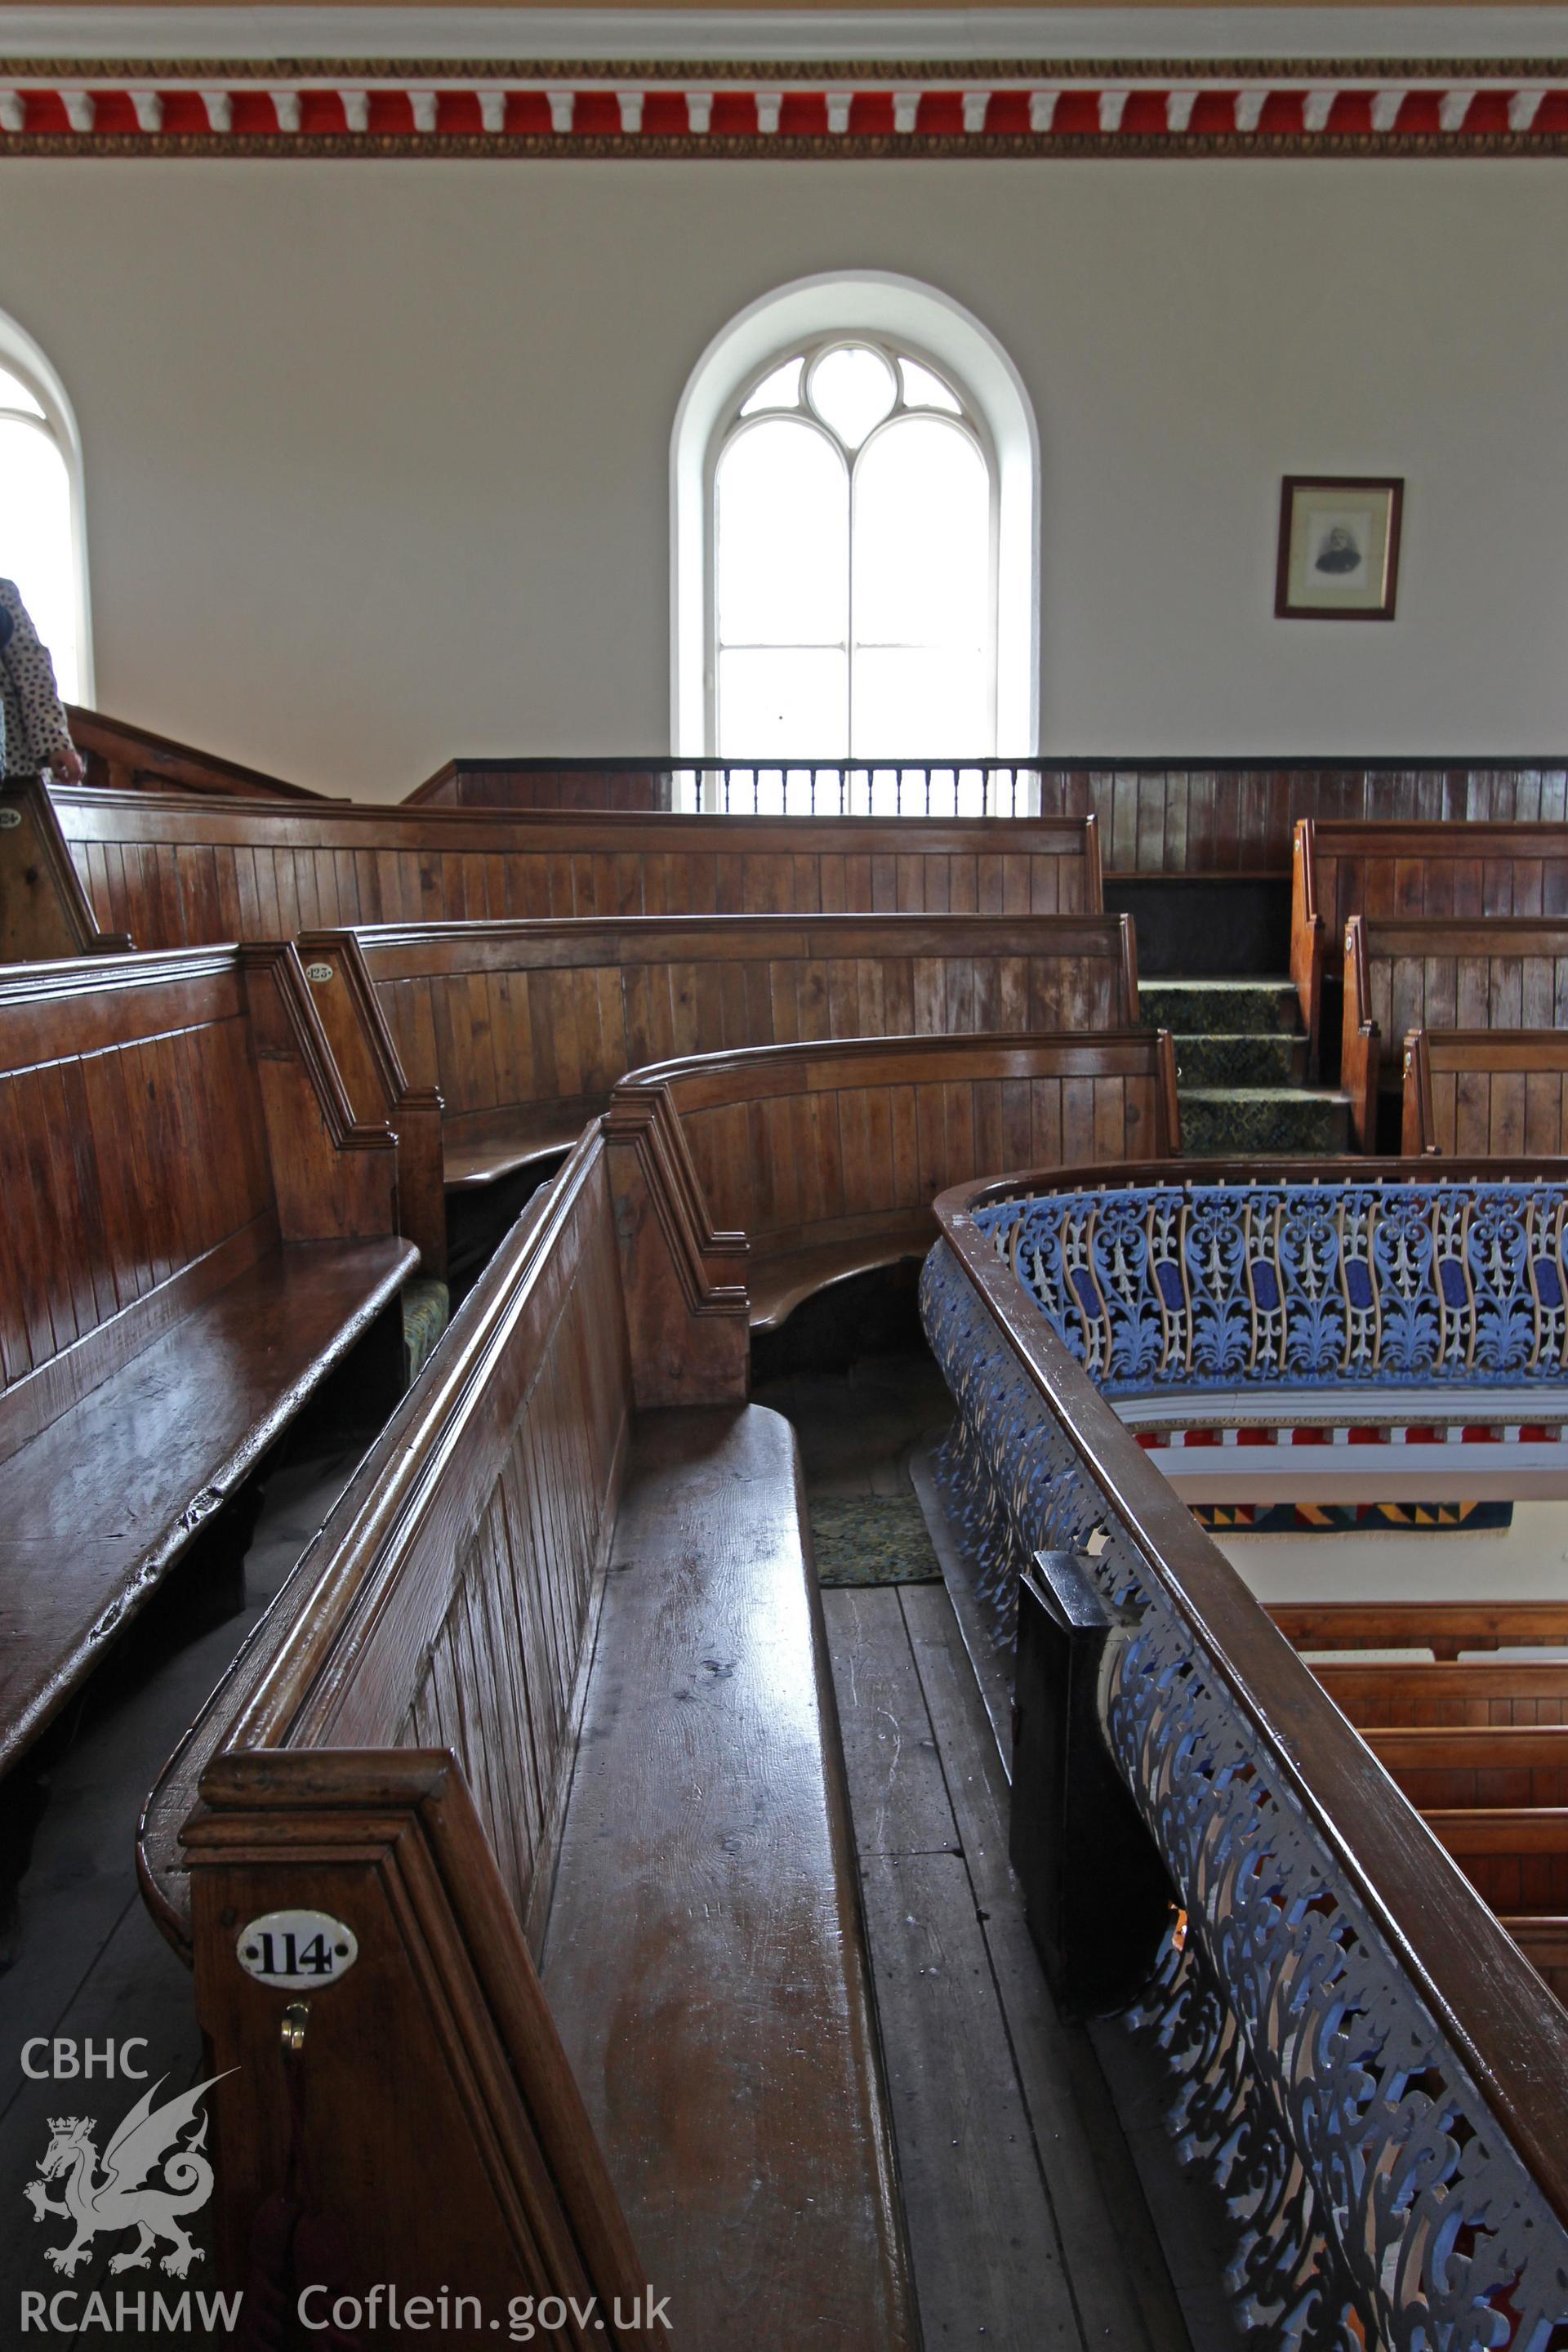 Interior view of first floor balcony pews. Photographic survey of Seion Welsh Baptist Chapel, Morriston, conducted by Sue Fielding on 13th May 2017.